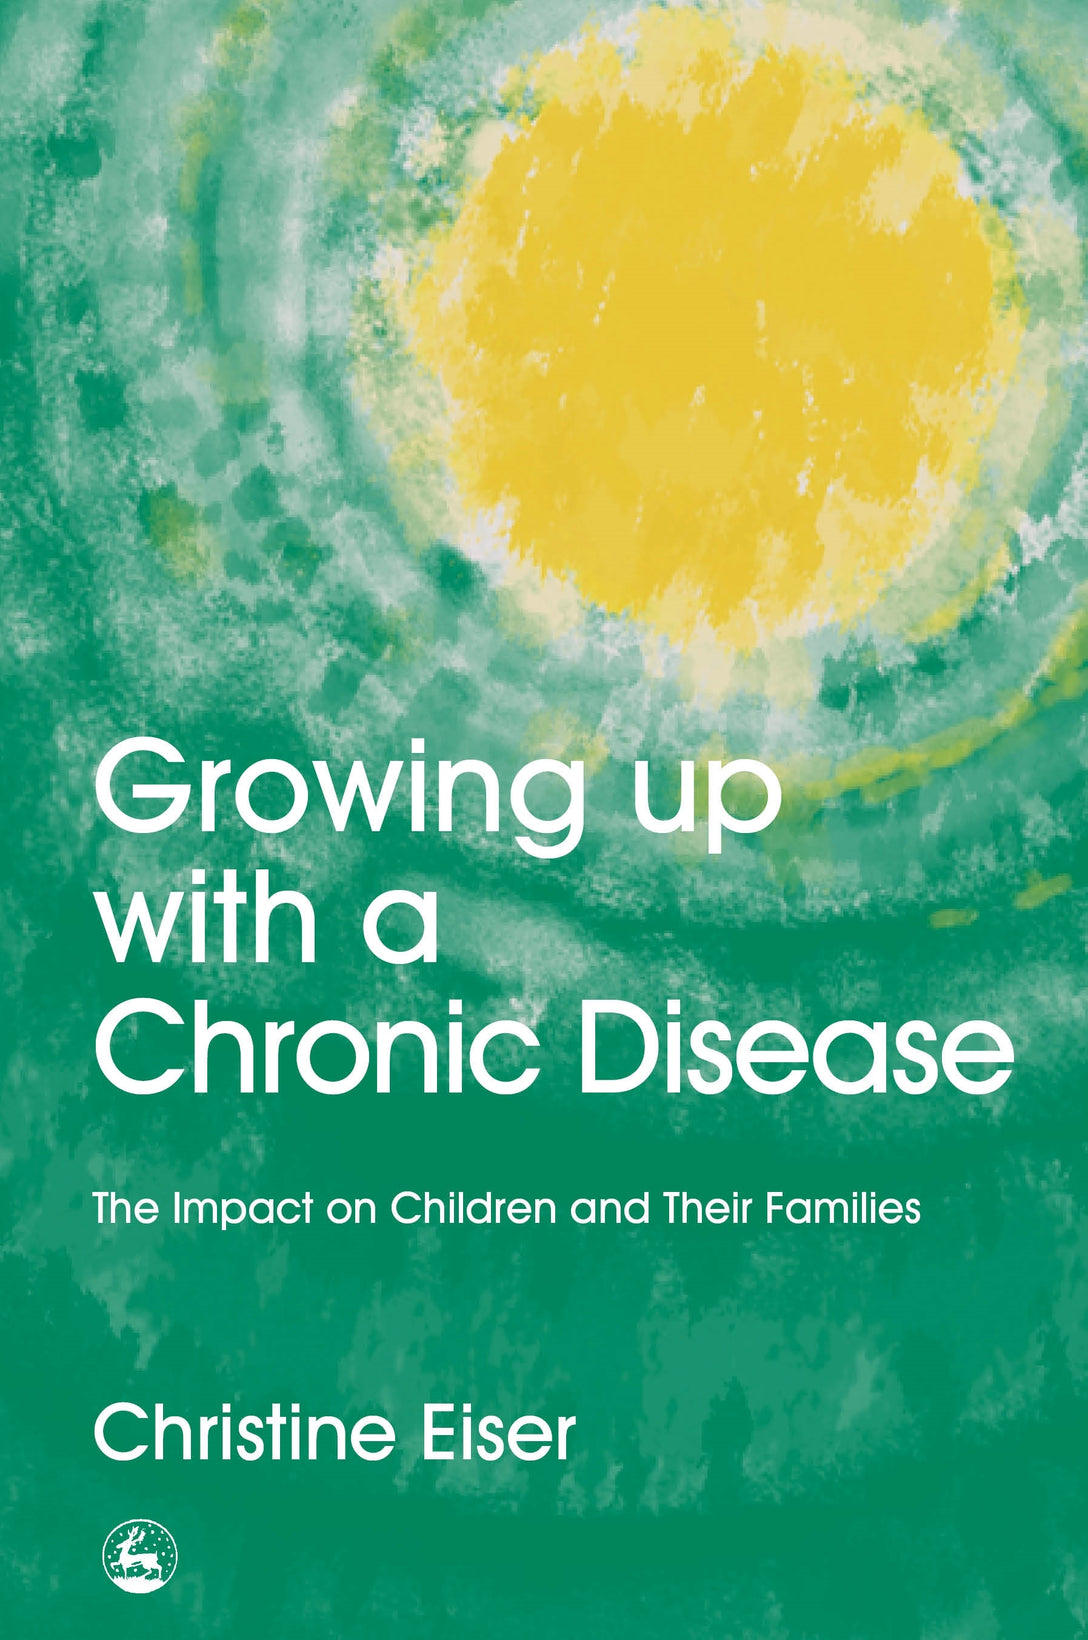 Growing Up with a Chronic Disease by Christine Eiser